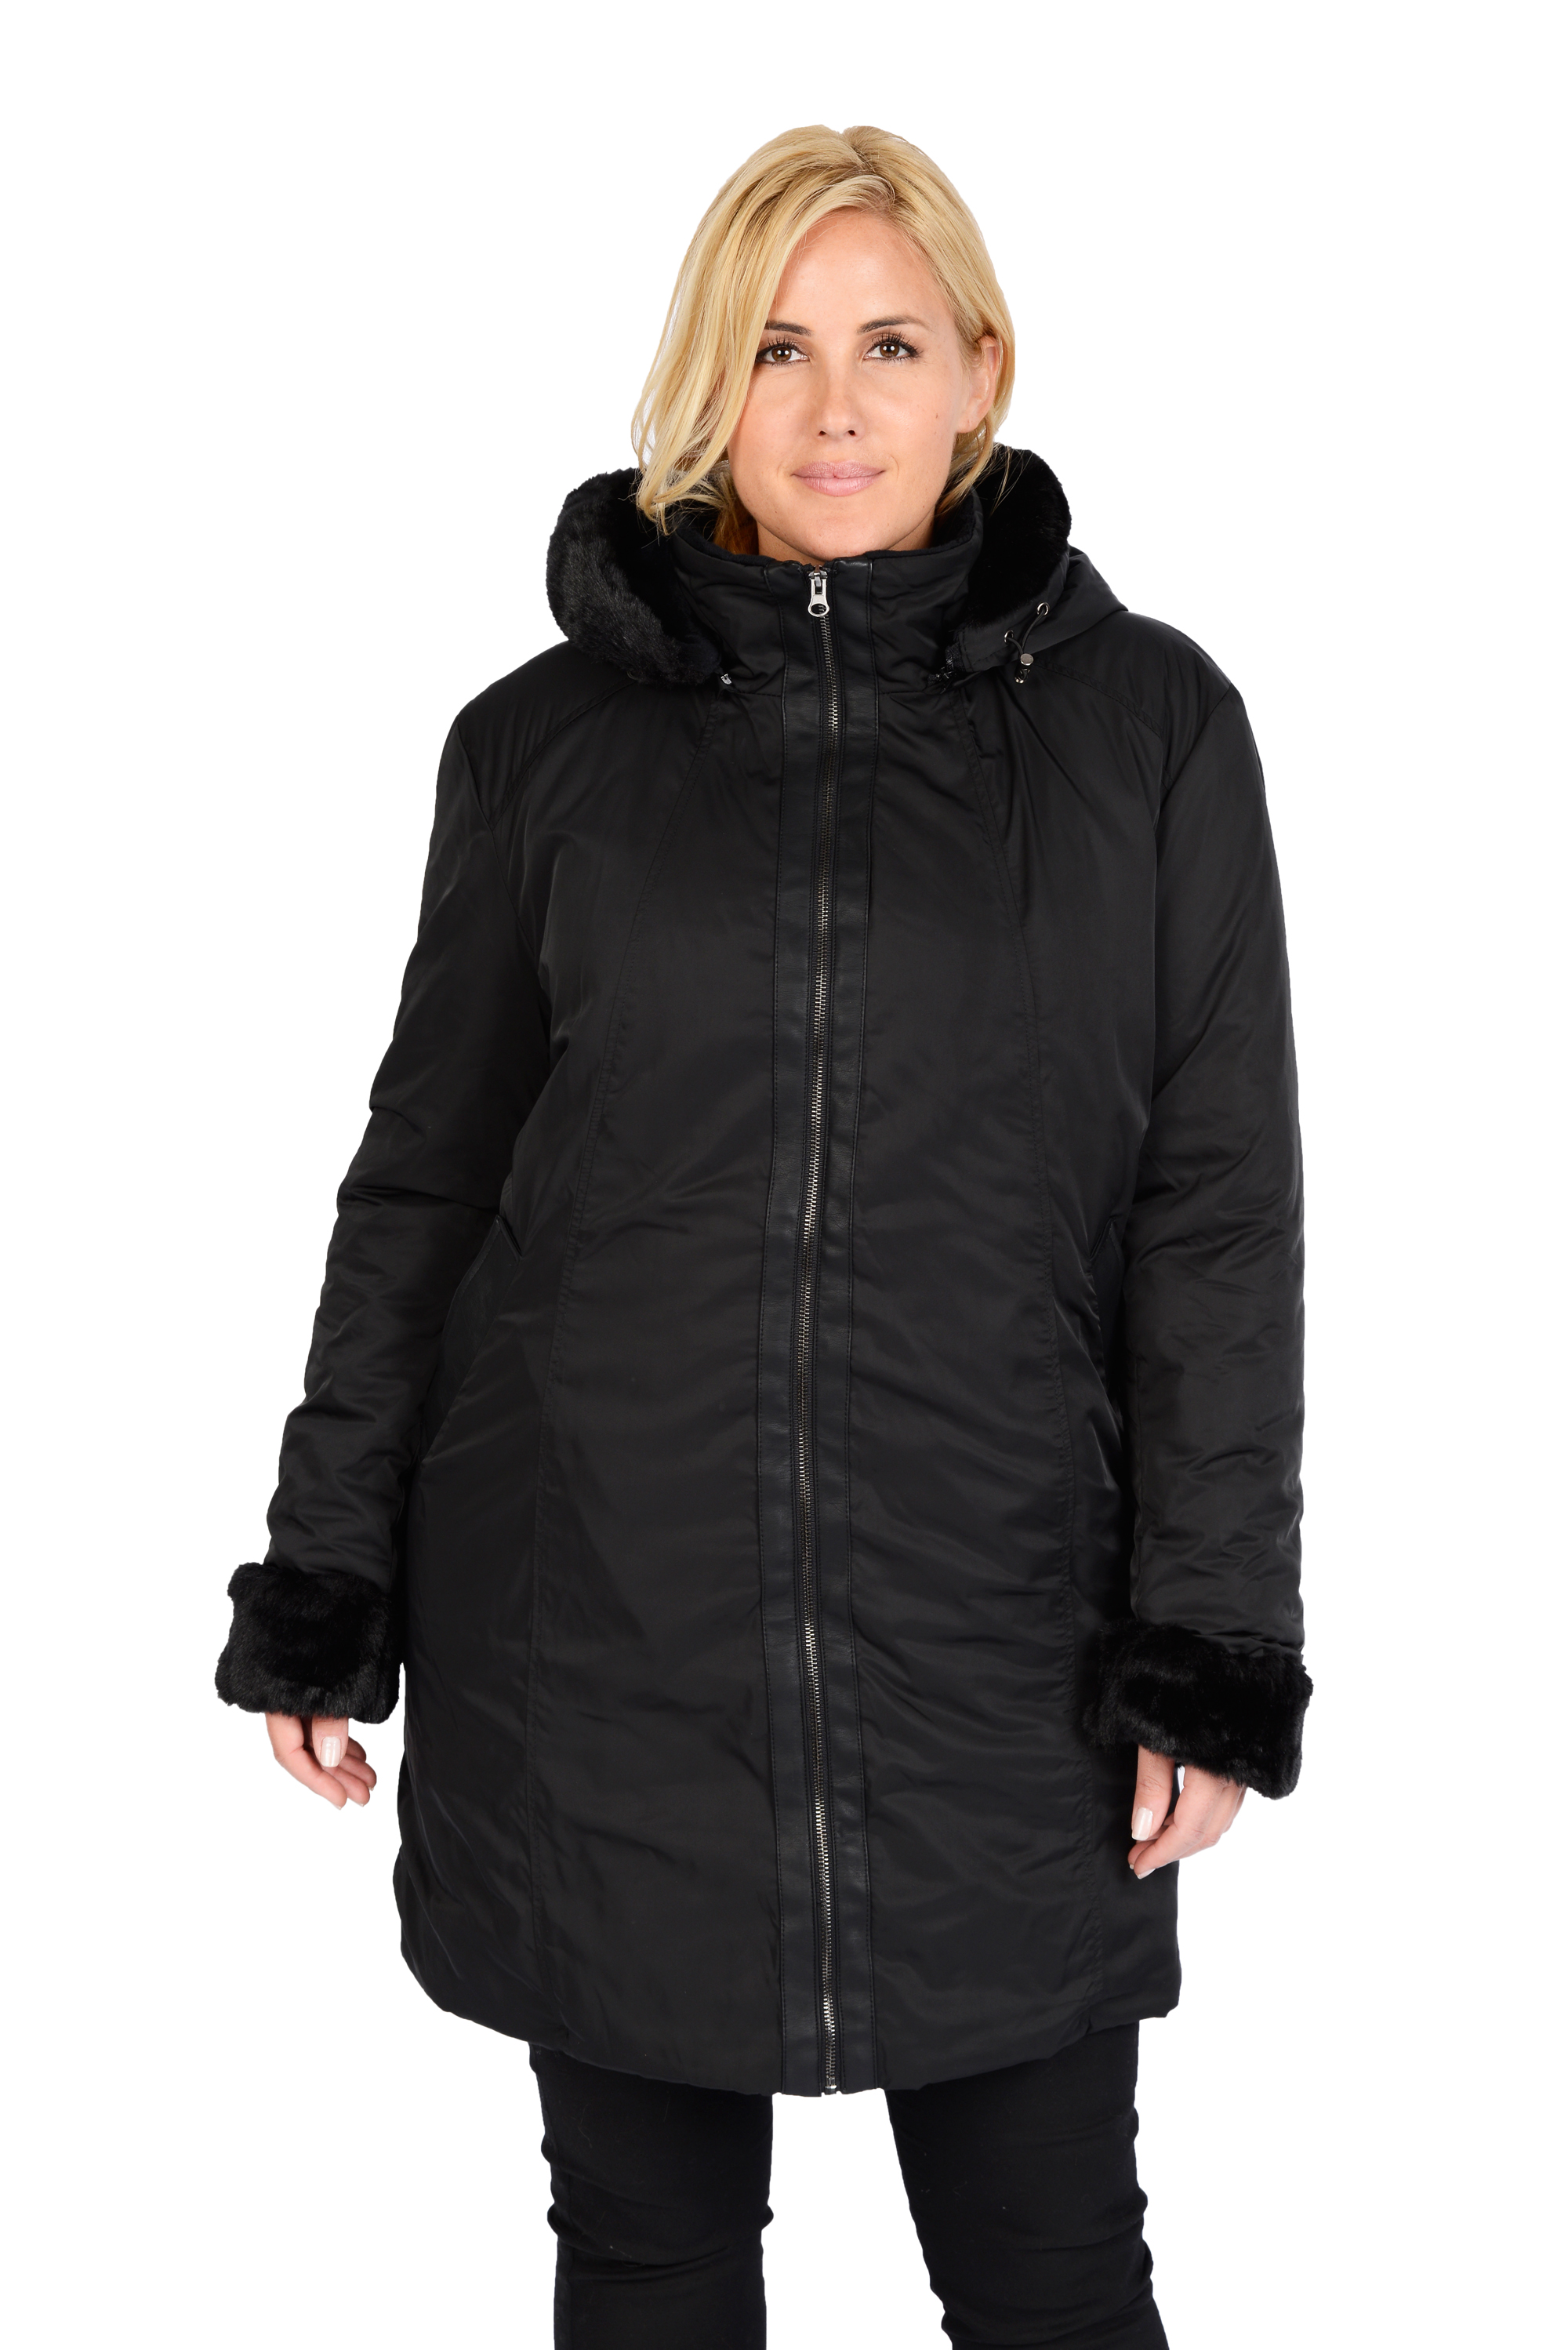 UPC 805099000258 product image for Women's Plus Polyester Activewear with Faux Fur Trim Hood and Cuffs | upcitemdb.com